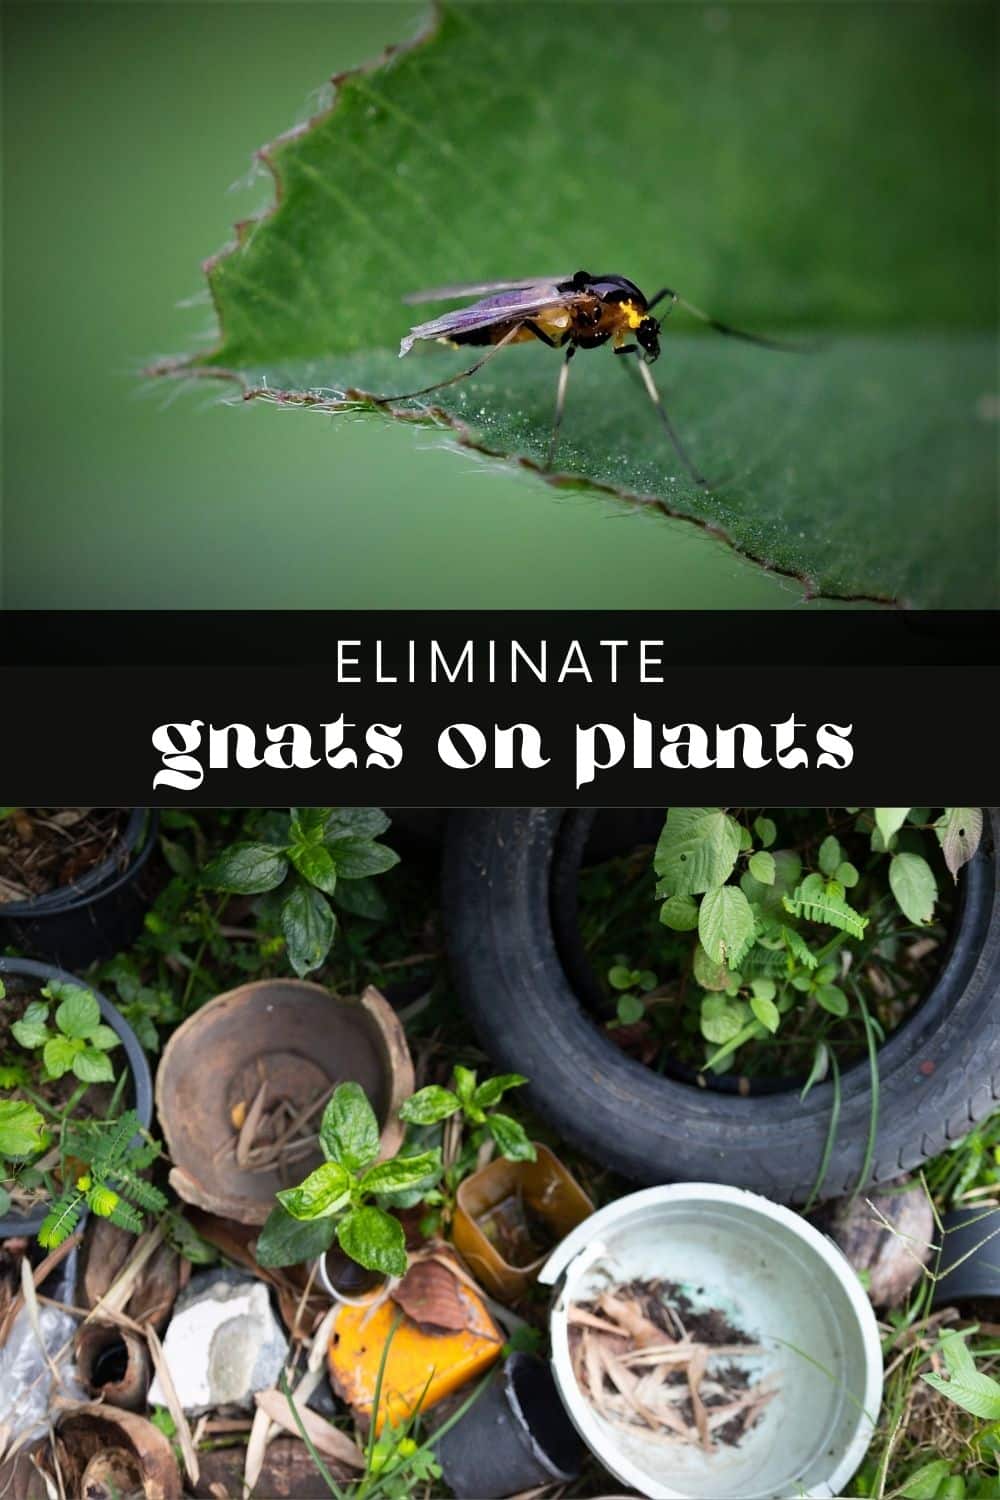 Fungus gnats are small, pesky insects that can be a nuisance to humans and plants. While gnats only have a short life cycle, they reproduce quickly, which makes getting rid of them tricky. If you're currently dealing with a gnat infestation, you're likely wondering what caused it in the first place. Could it be your beloved plants? In this article, we explore the connection between plants and gnats. We'll discuss if it is your plants that attract gnats, as well as tips on how to prevent and get rid of them.